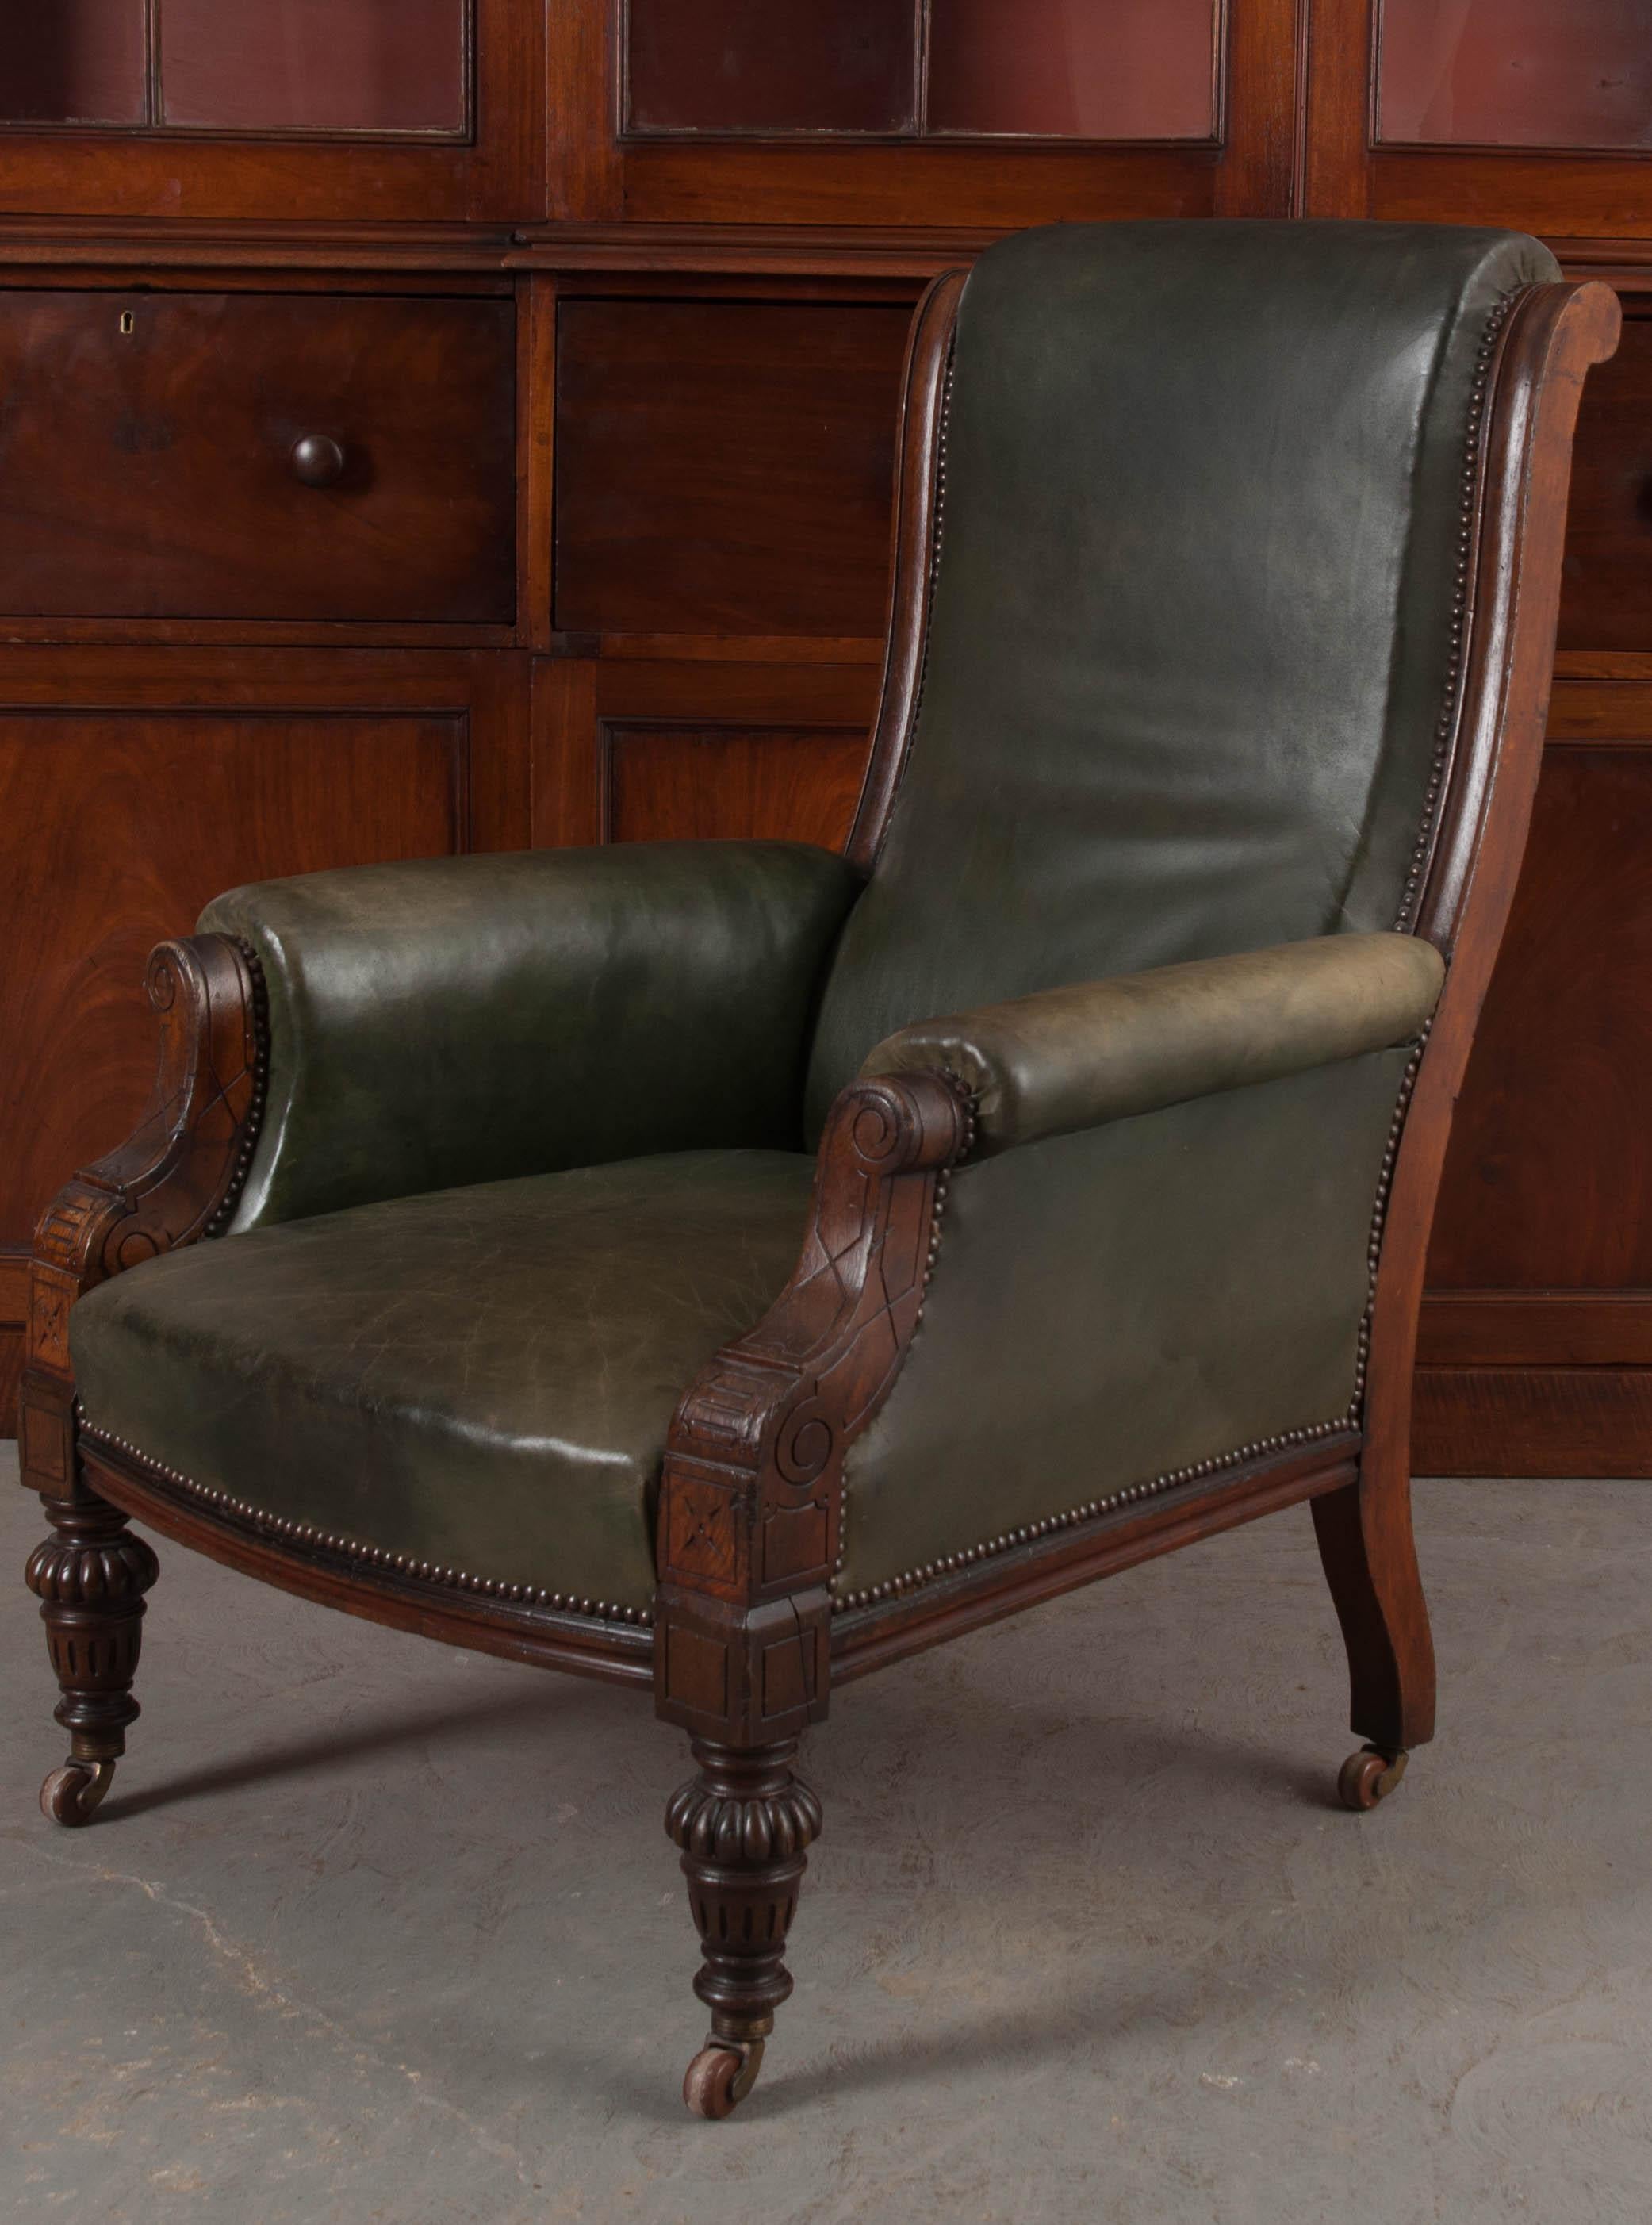 A stunning solid-walnut Georgian style armchair from 19th century England. Upholstered in an exquisite patinated green leather, the armchair looks like it would be owned by an informed individual. One that spends hours each day reading and